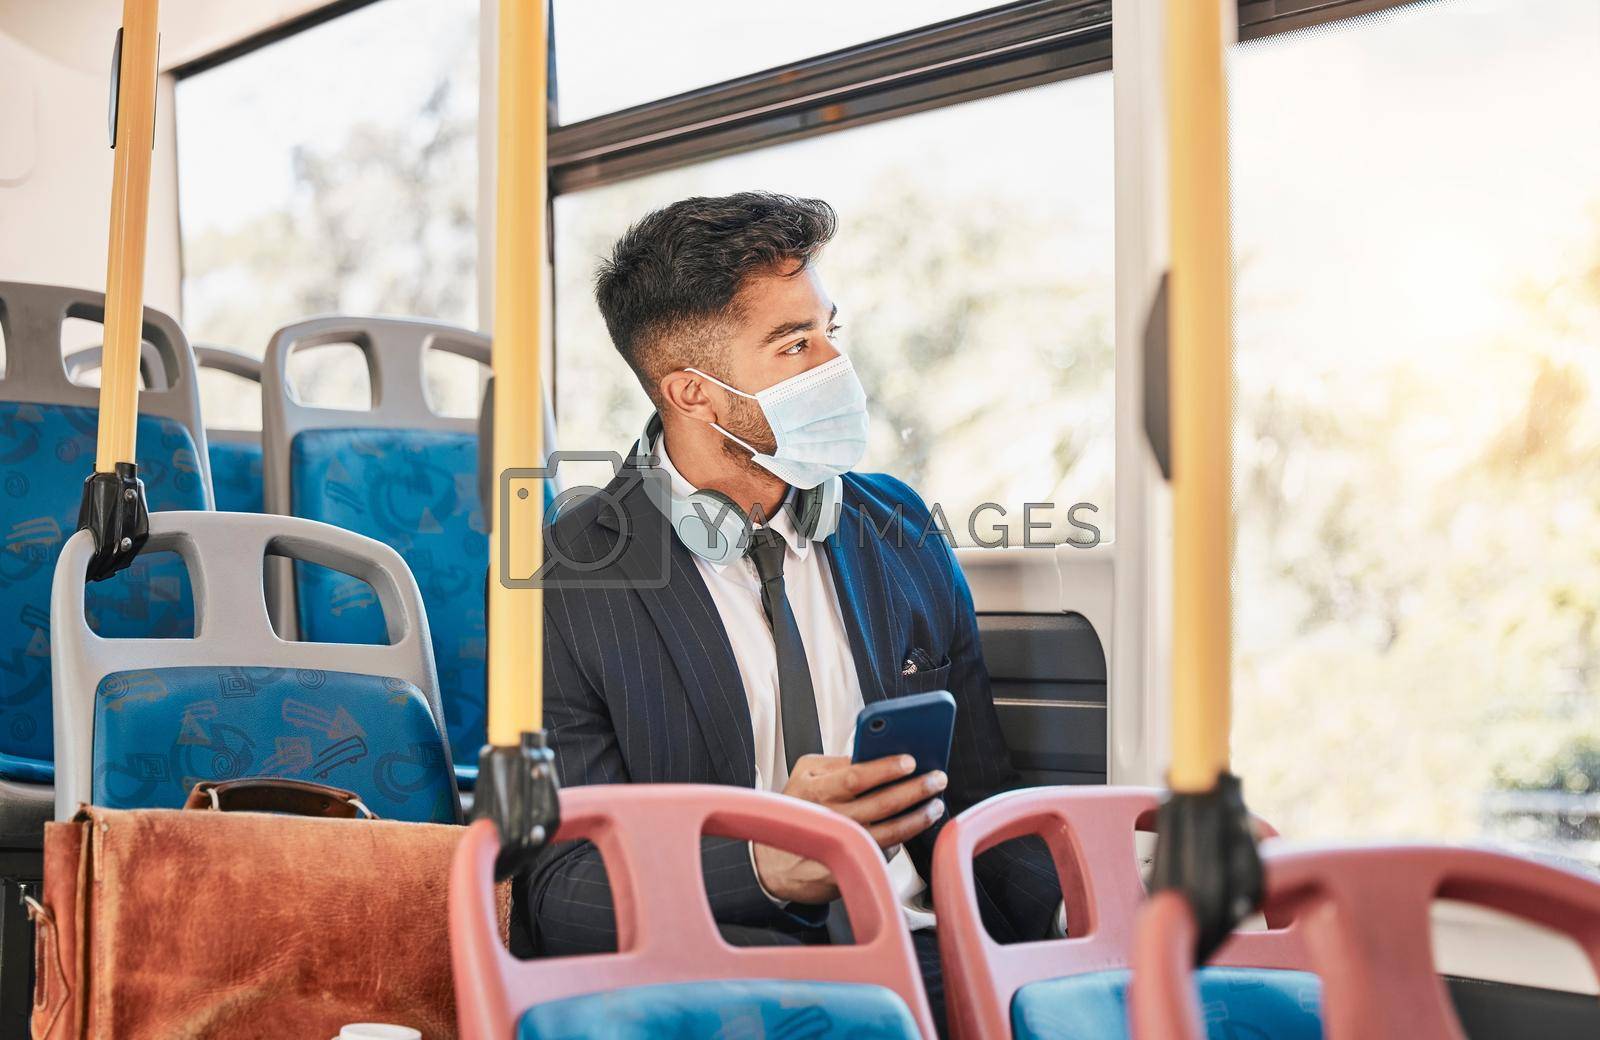 Covid, bus travel and business phone while on public transport commute with pandemic regulations. Worker with face mask protection while travelling to work for virus safety and prevention